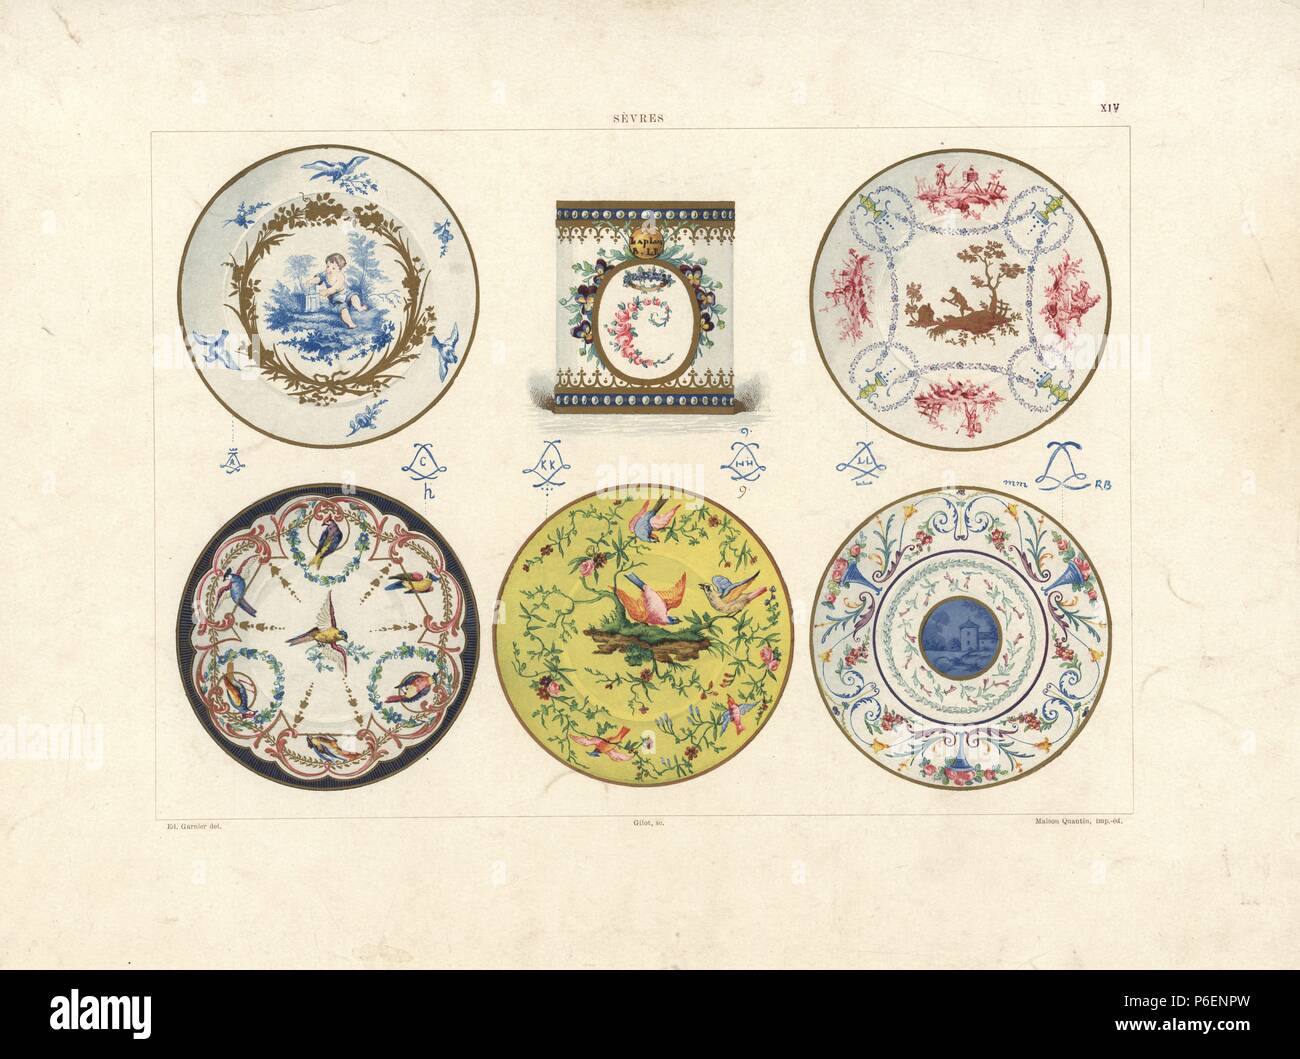 Plates with exceptional decoration: cupid by Vieillard 1753, plaque by Merault Jr. 1783, pastoral theme by Vieillard 1786, birds by Huny 1755, birds and flowers by Fontaine 1785, and blue vignette by Madame Maqueret 1785. Chromolithograph by Gillot of an illustration by Edouard Garnier from The Soft Paste Porcelain of Sevres, Maison Quantin, Paris, 1891. Stock Photo